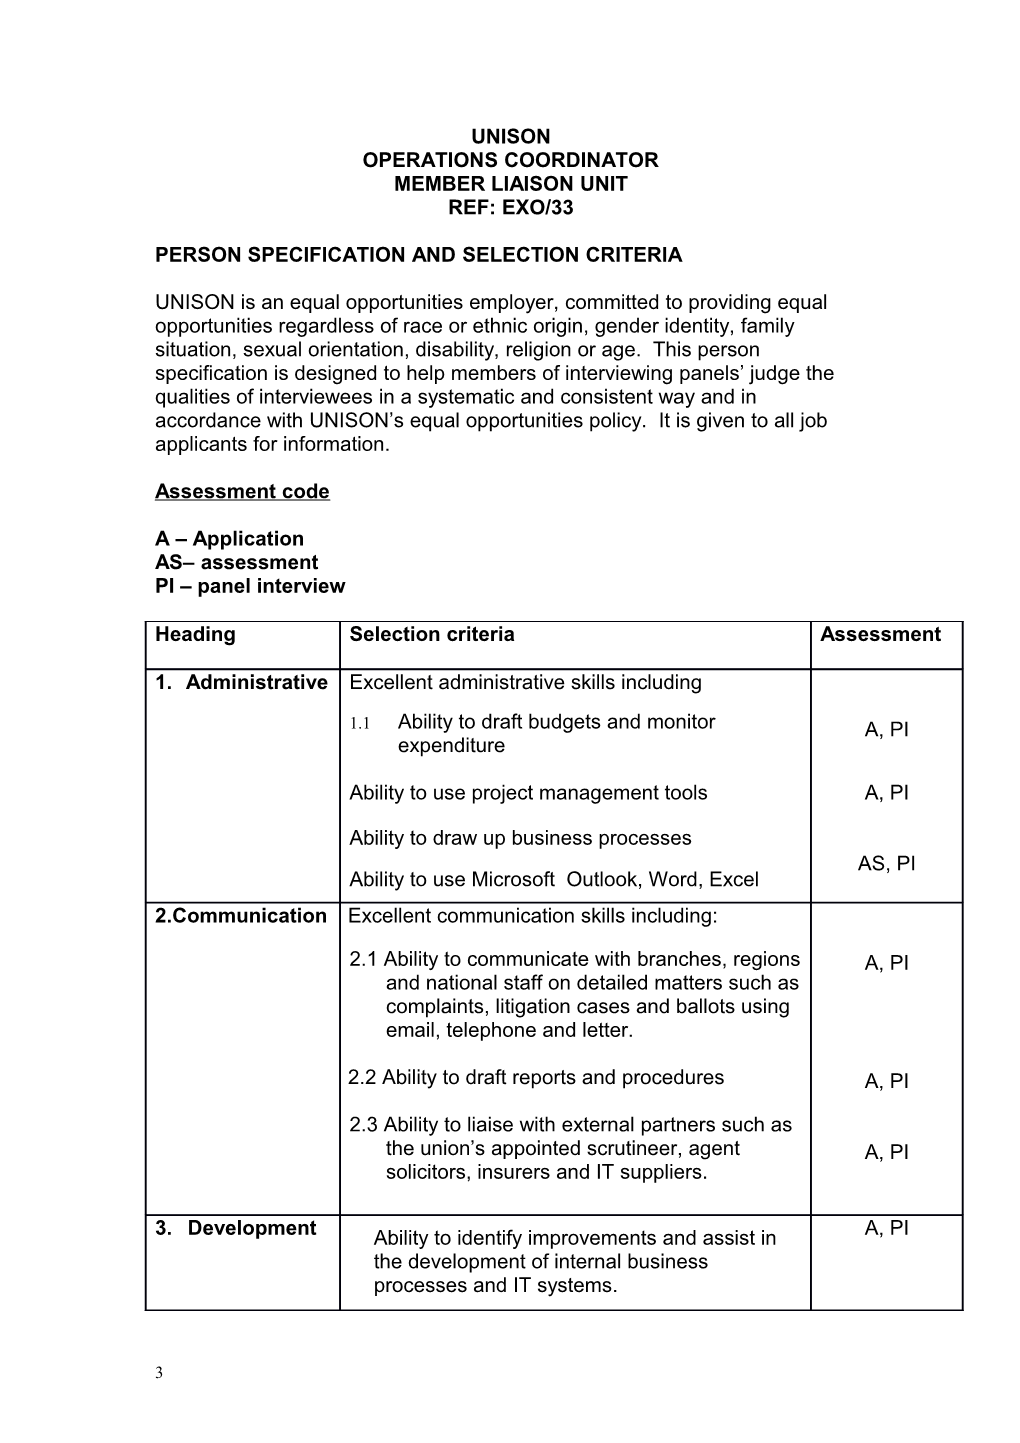 Job Description and Person Specification - Operations Co-Odinator (December 2014)